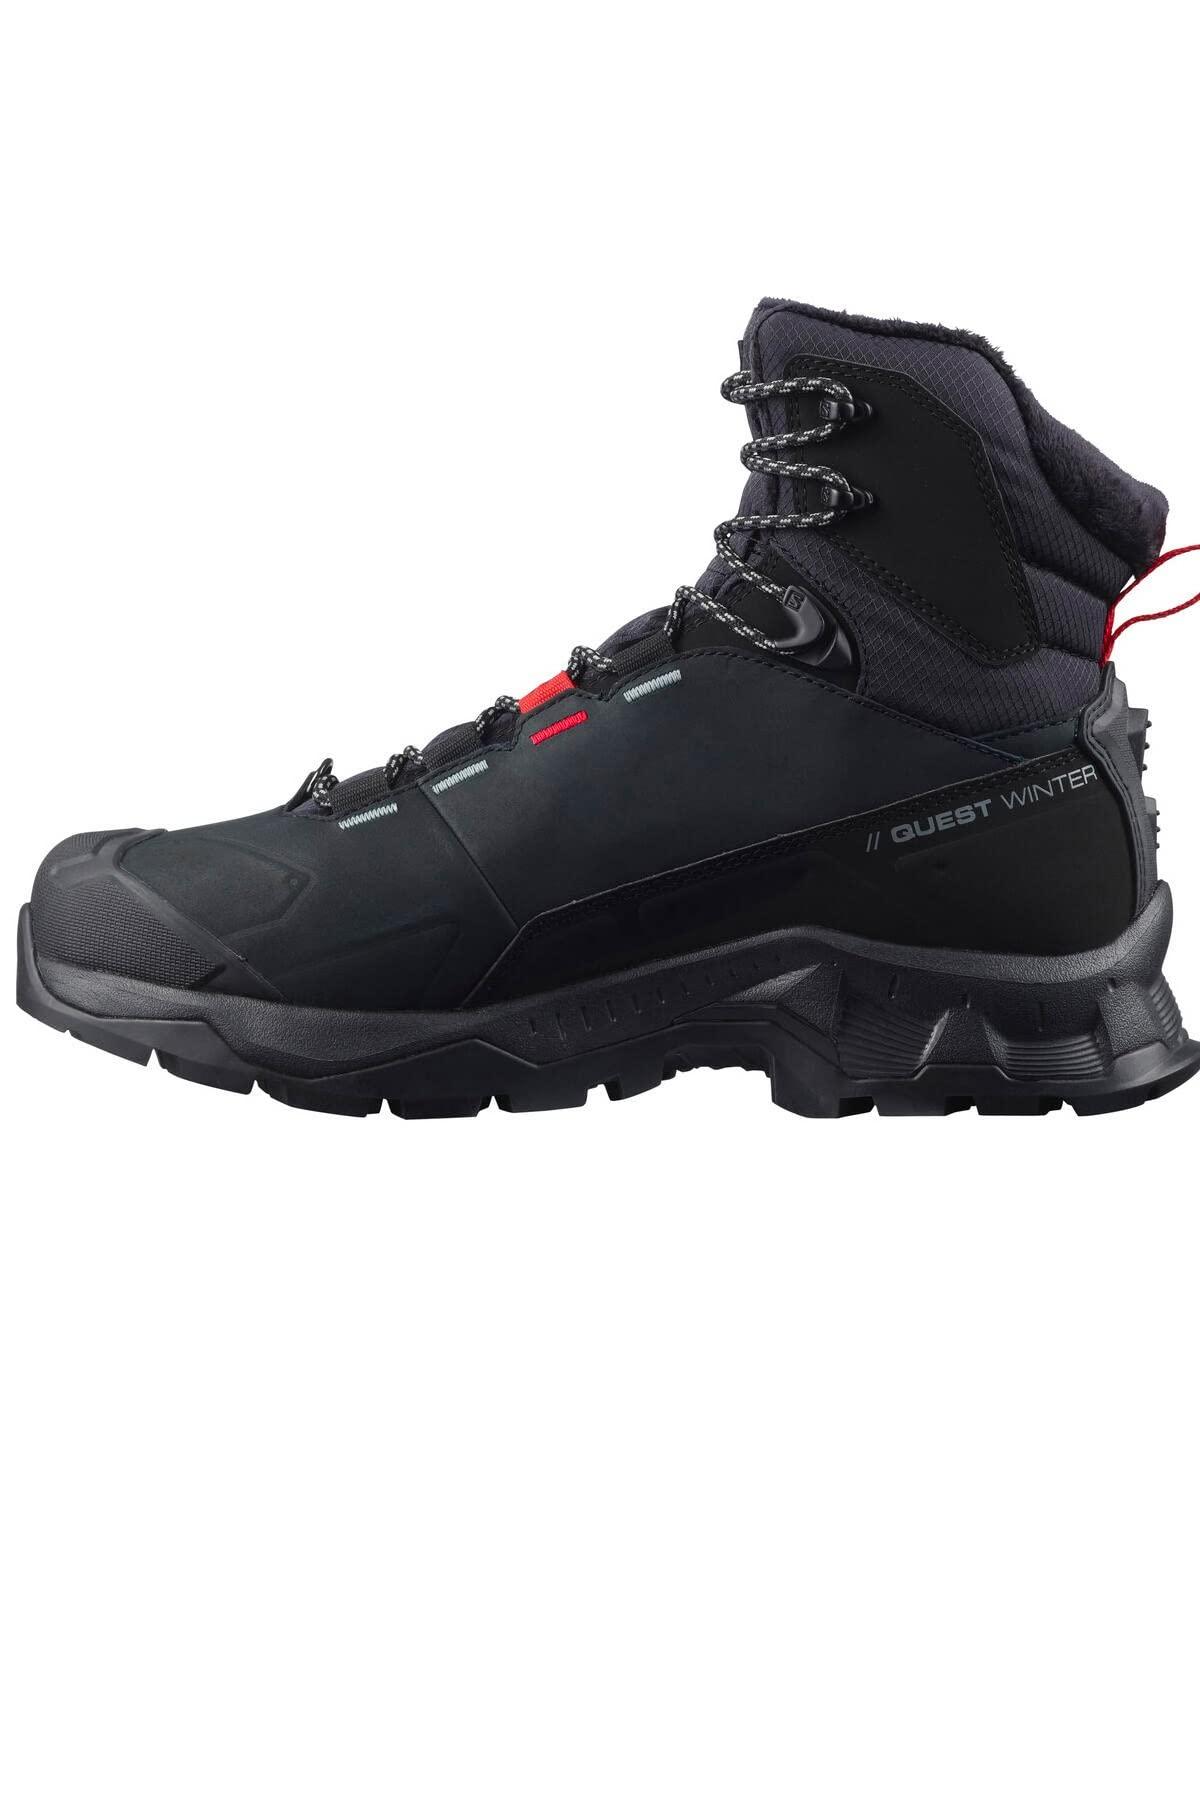 Salomon Quest Thinsulate Clima Waterproof Winter Boots Snow in Black for  Men | Lyst